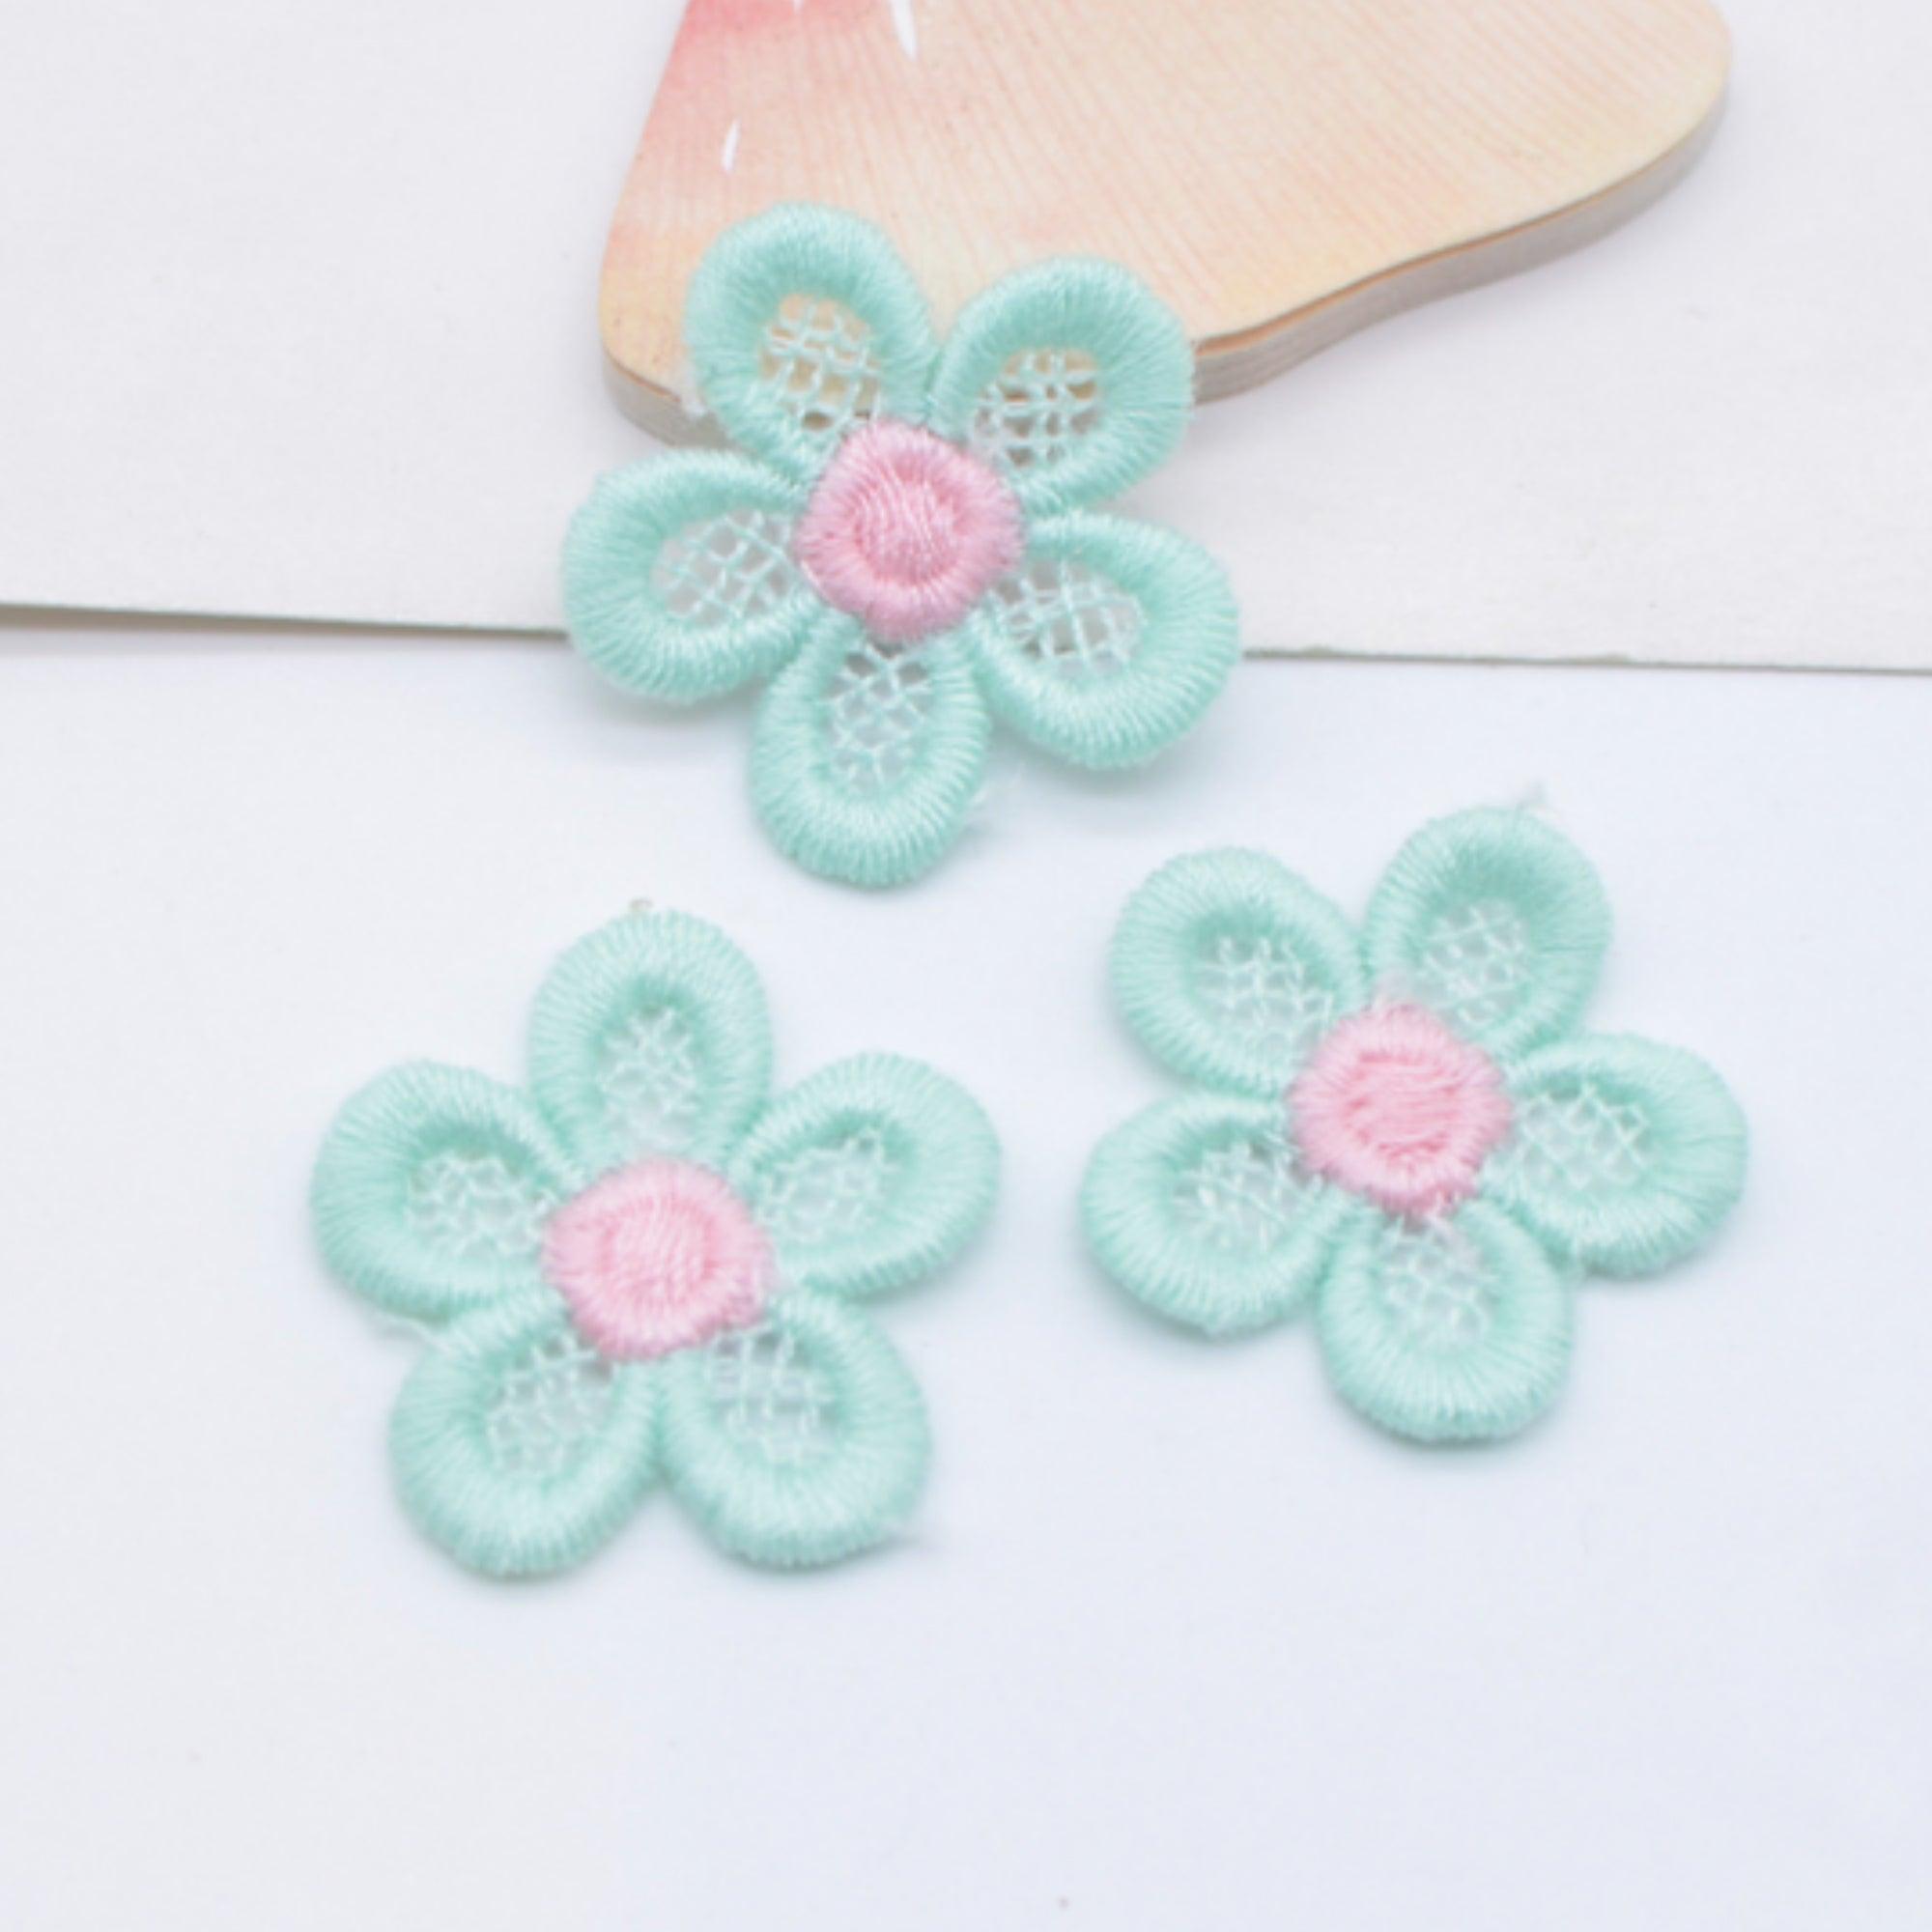 Embroidered Daisies Collection Mint & Pink 1" Scrapbook Flower Embellishments by SSC Designs - 10 Pieces